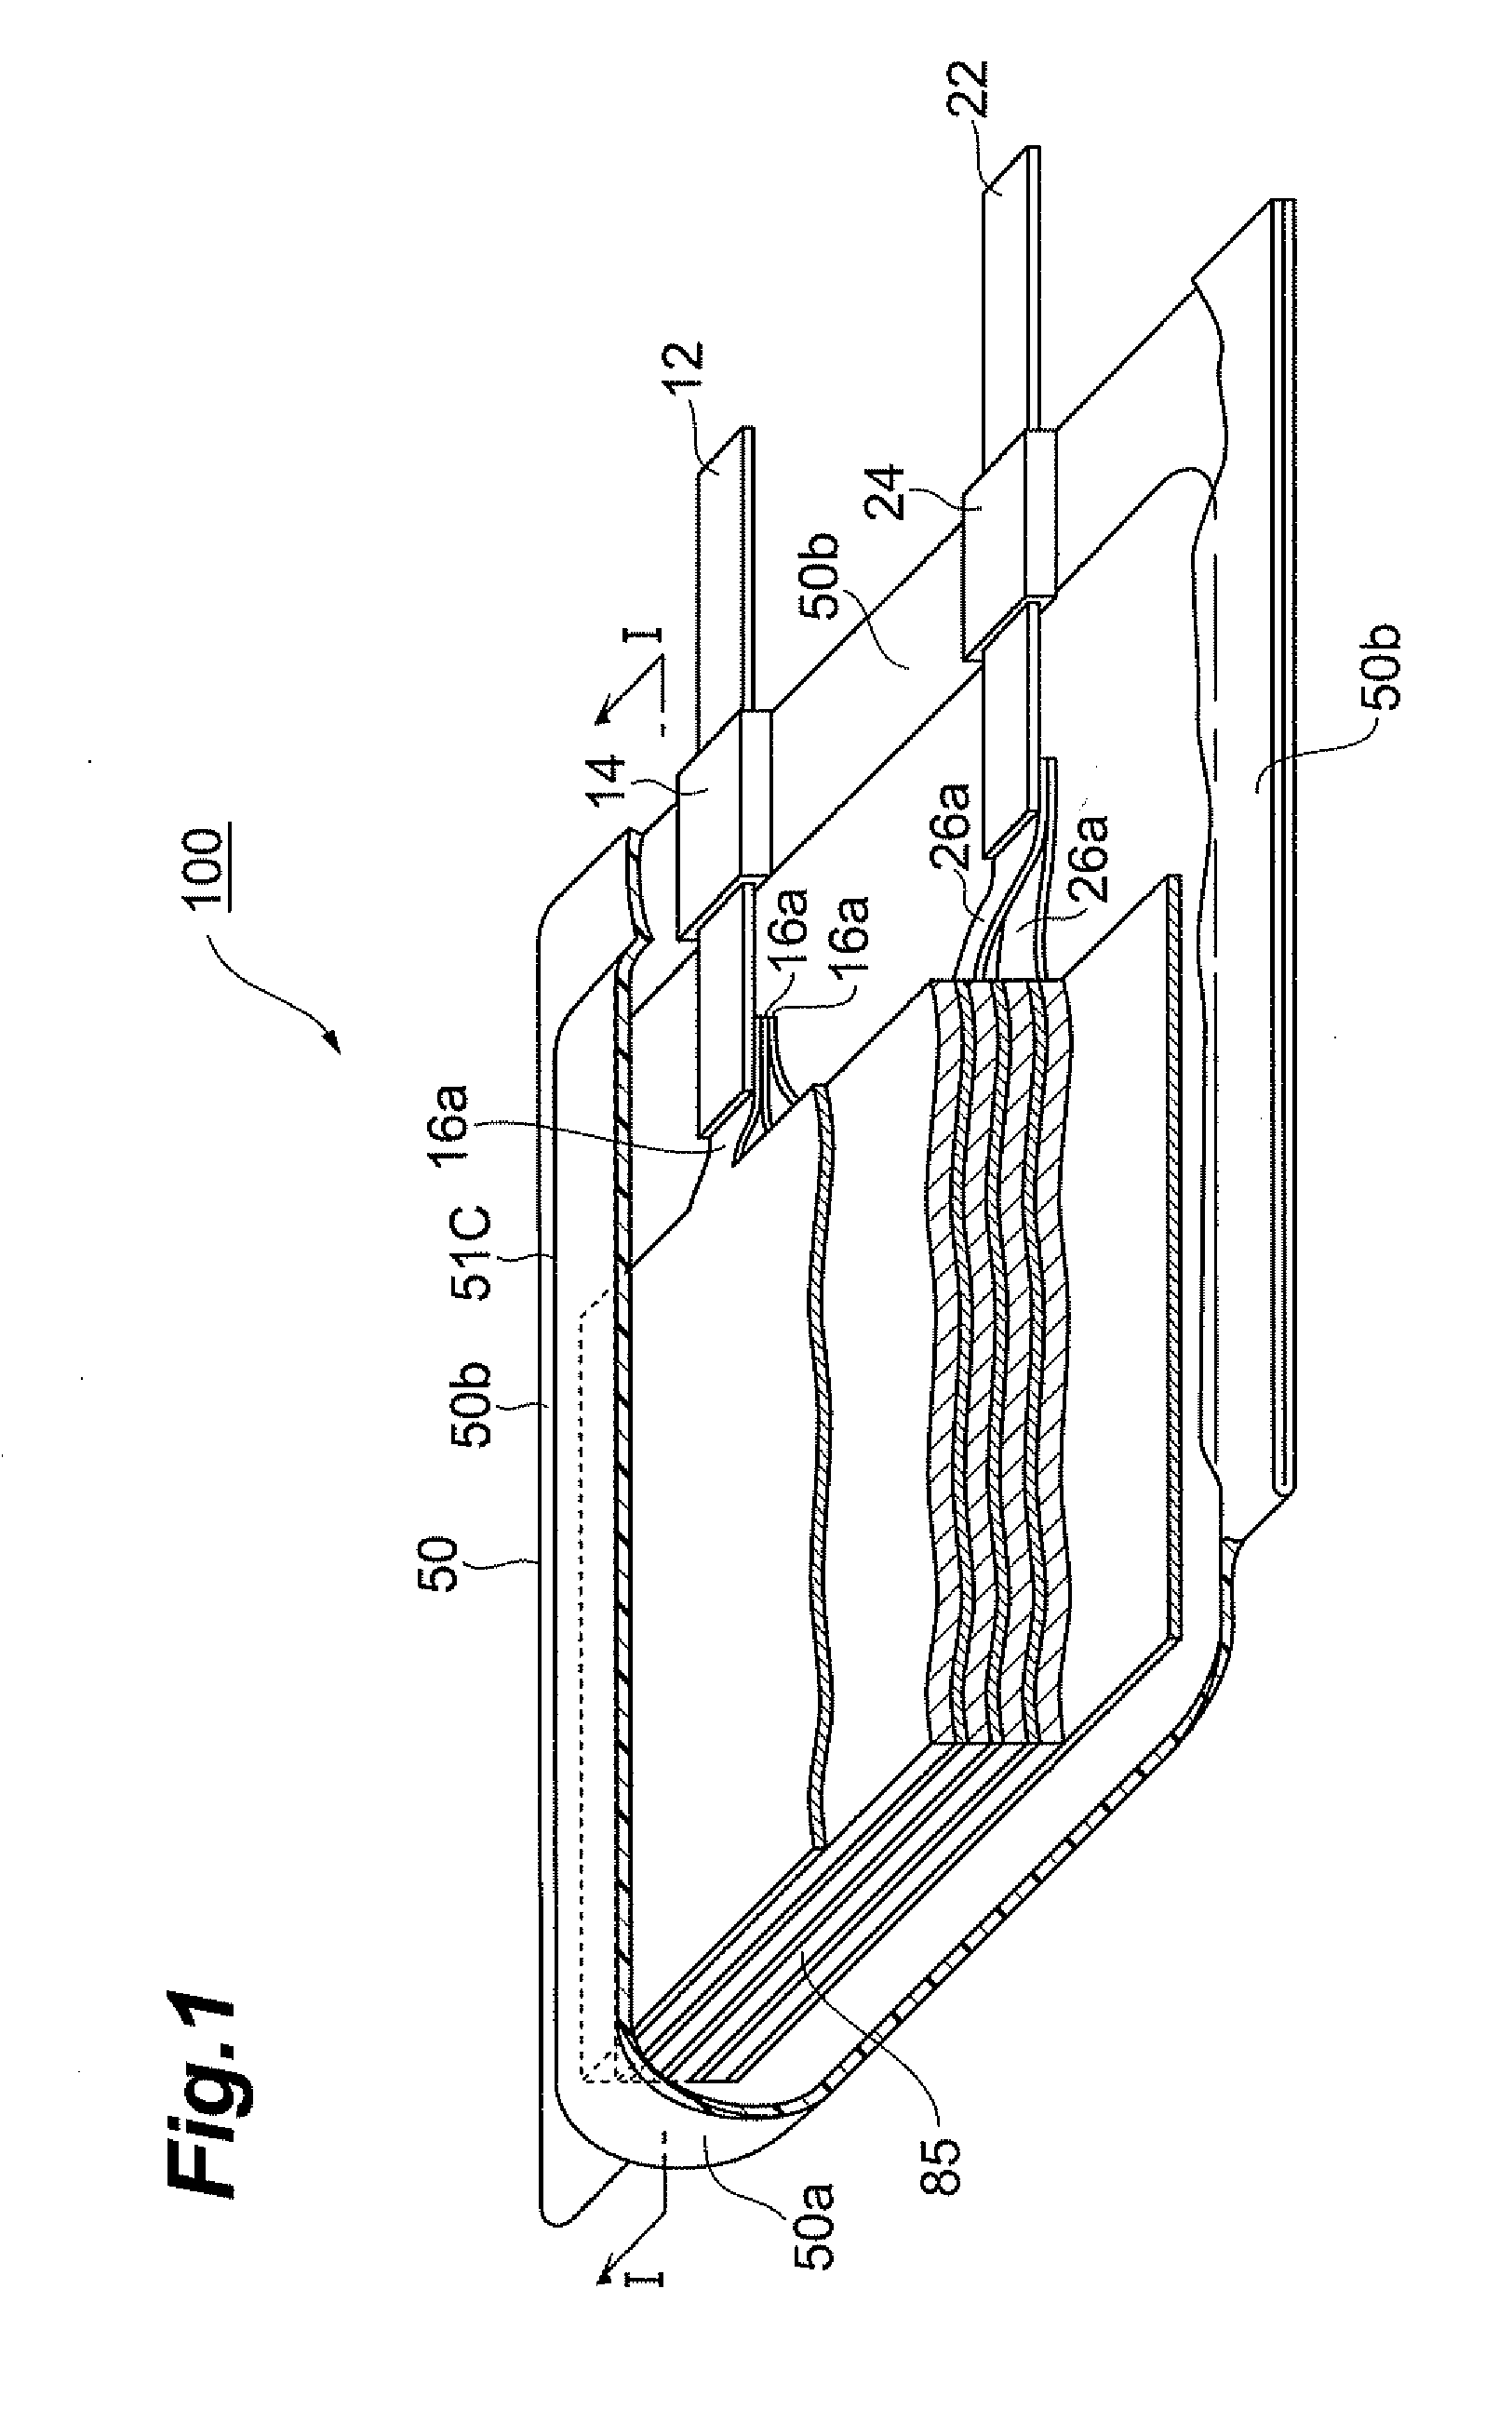 Electrochemical Device